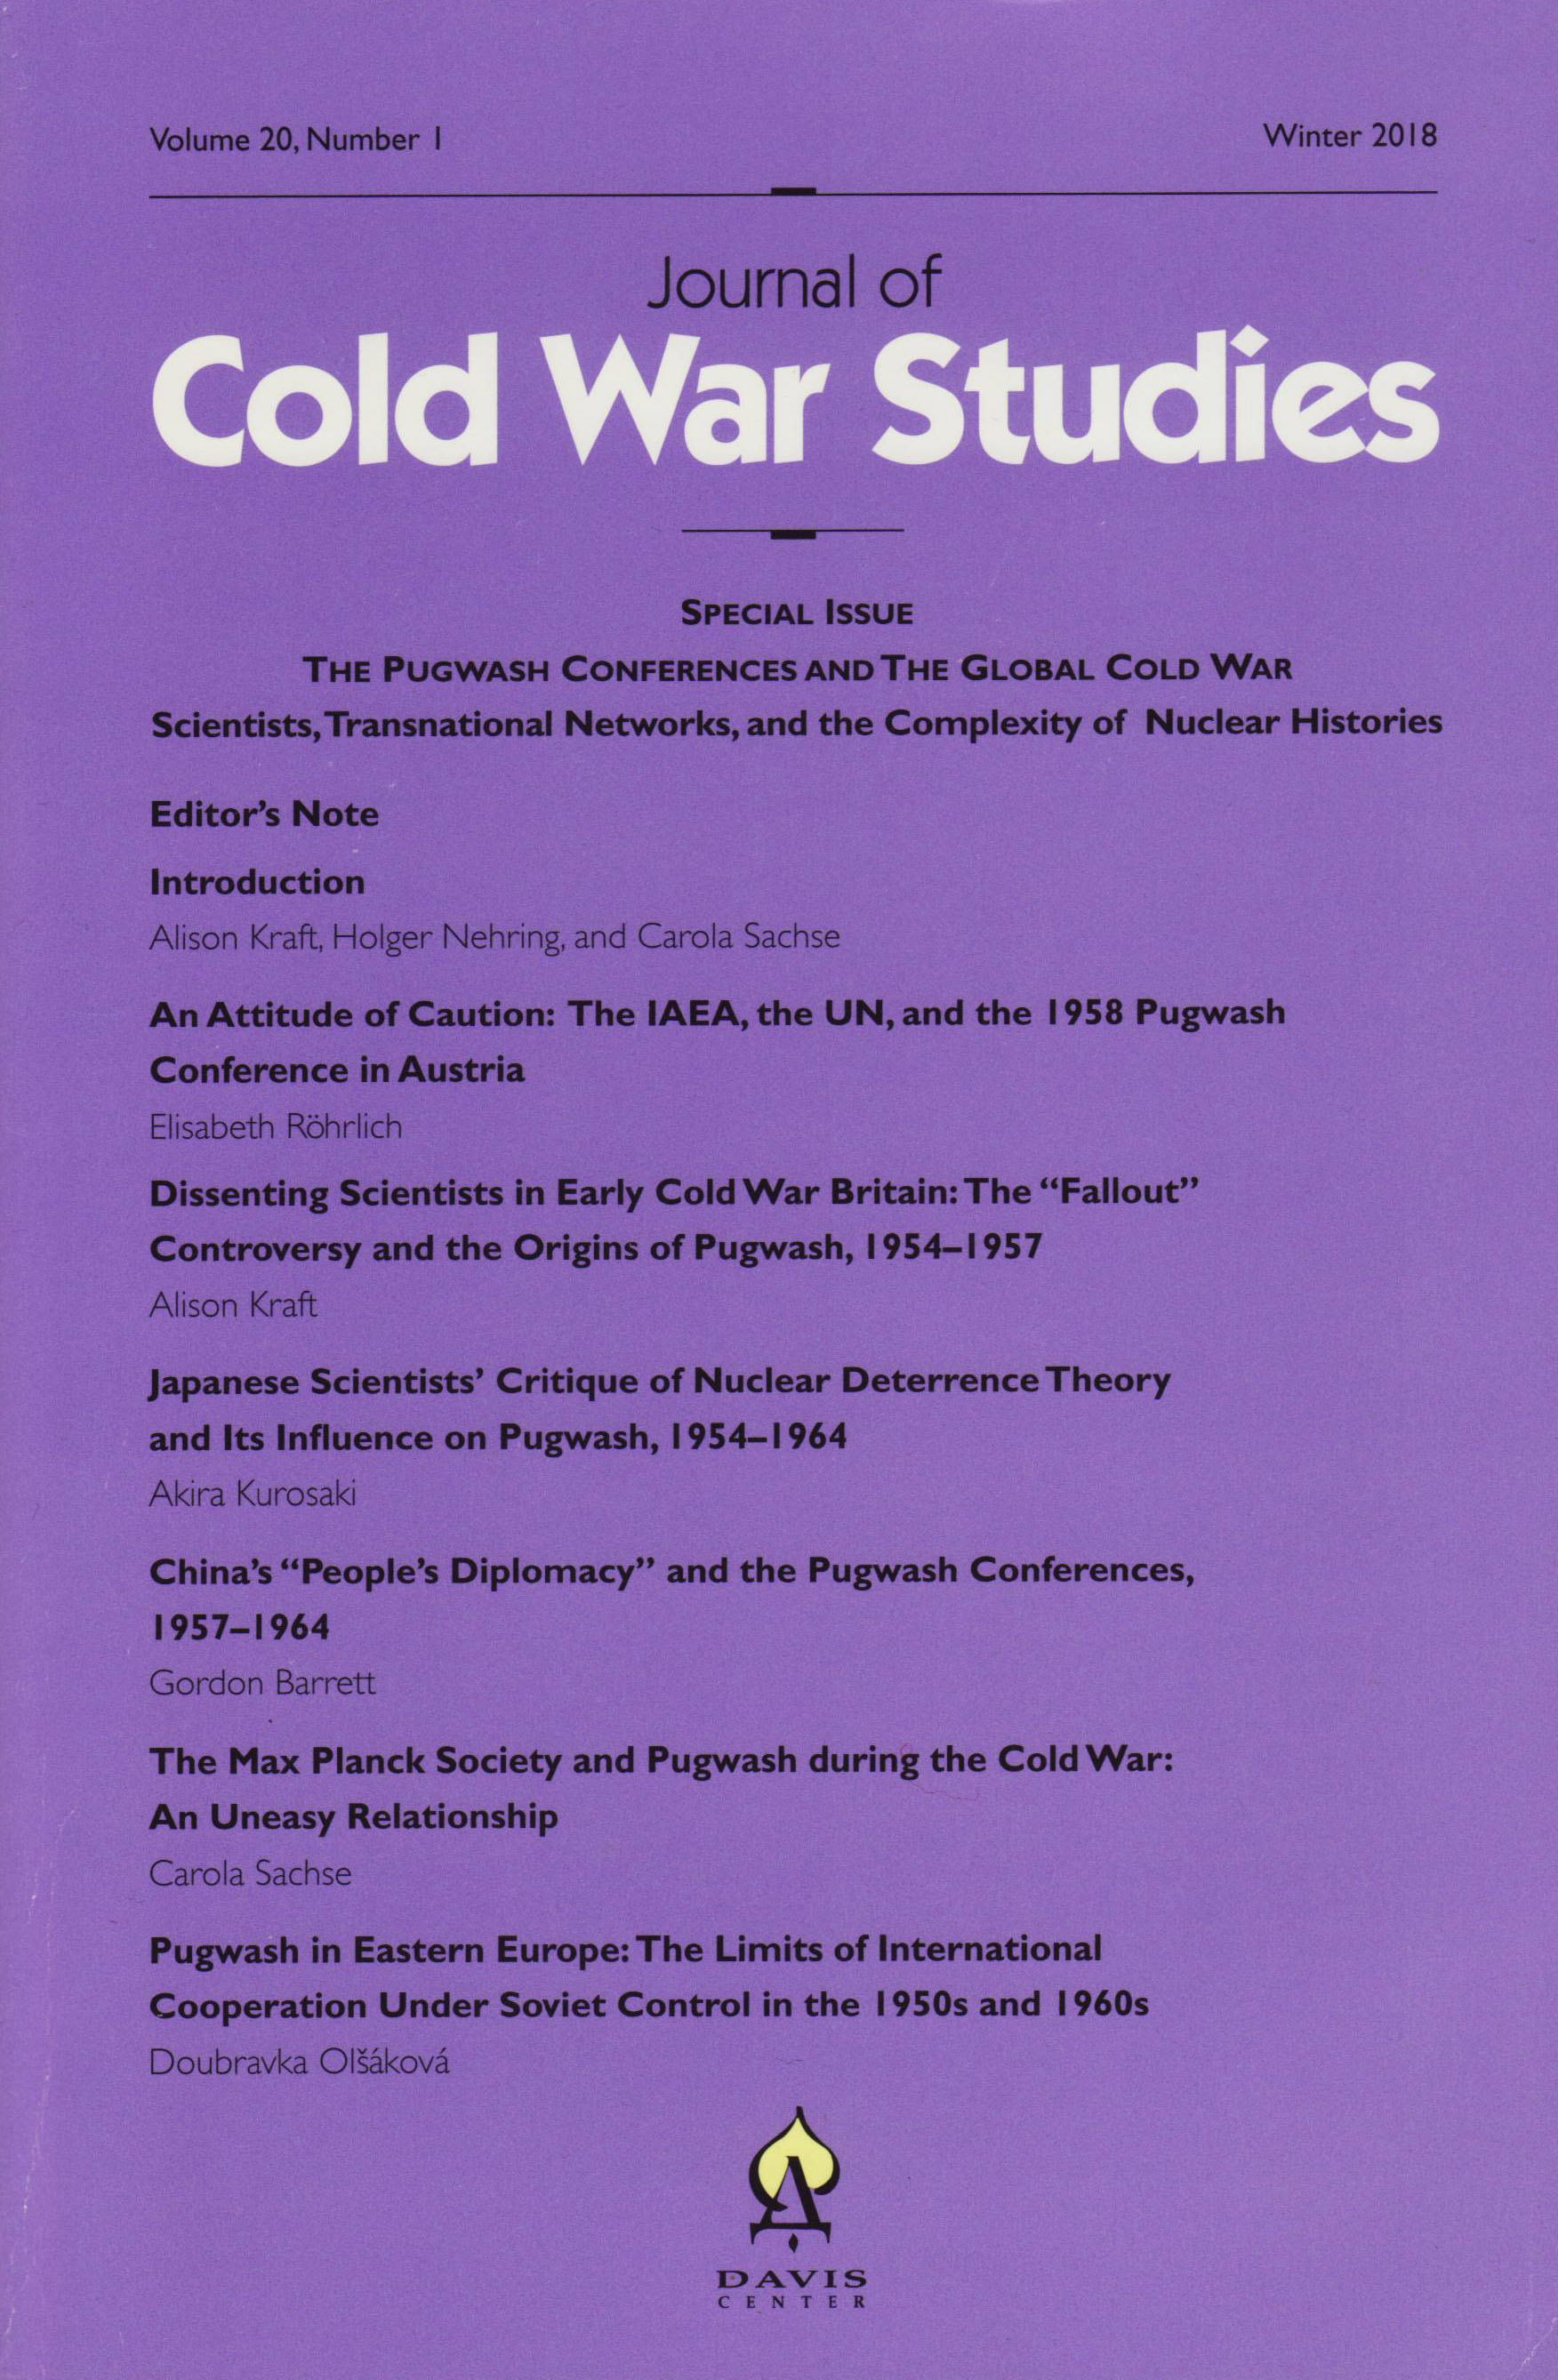 book cover: Kraft/ Sachse: The Pugwash Conferences and the Global Cold War (2018) (Journal of Cold War Studies)